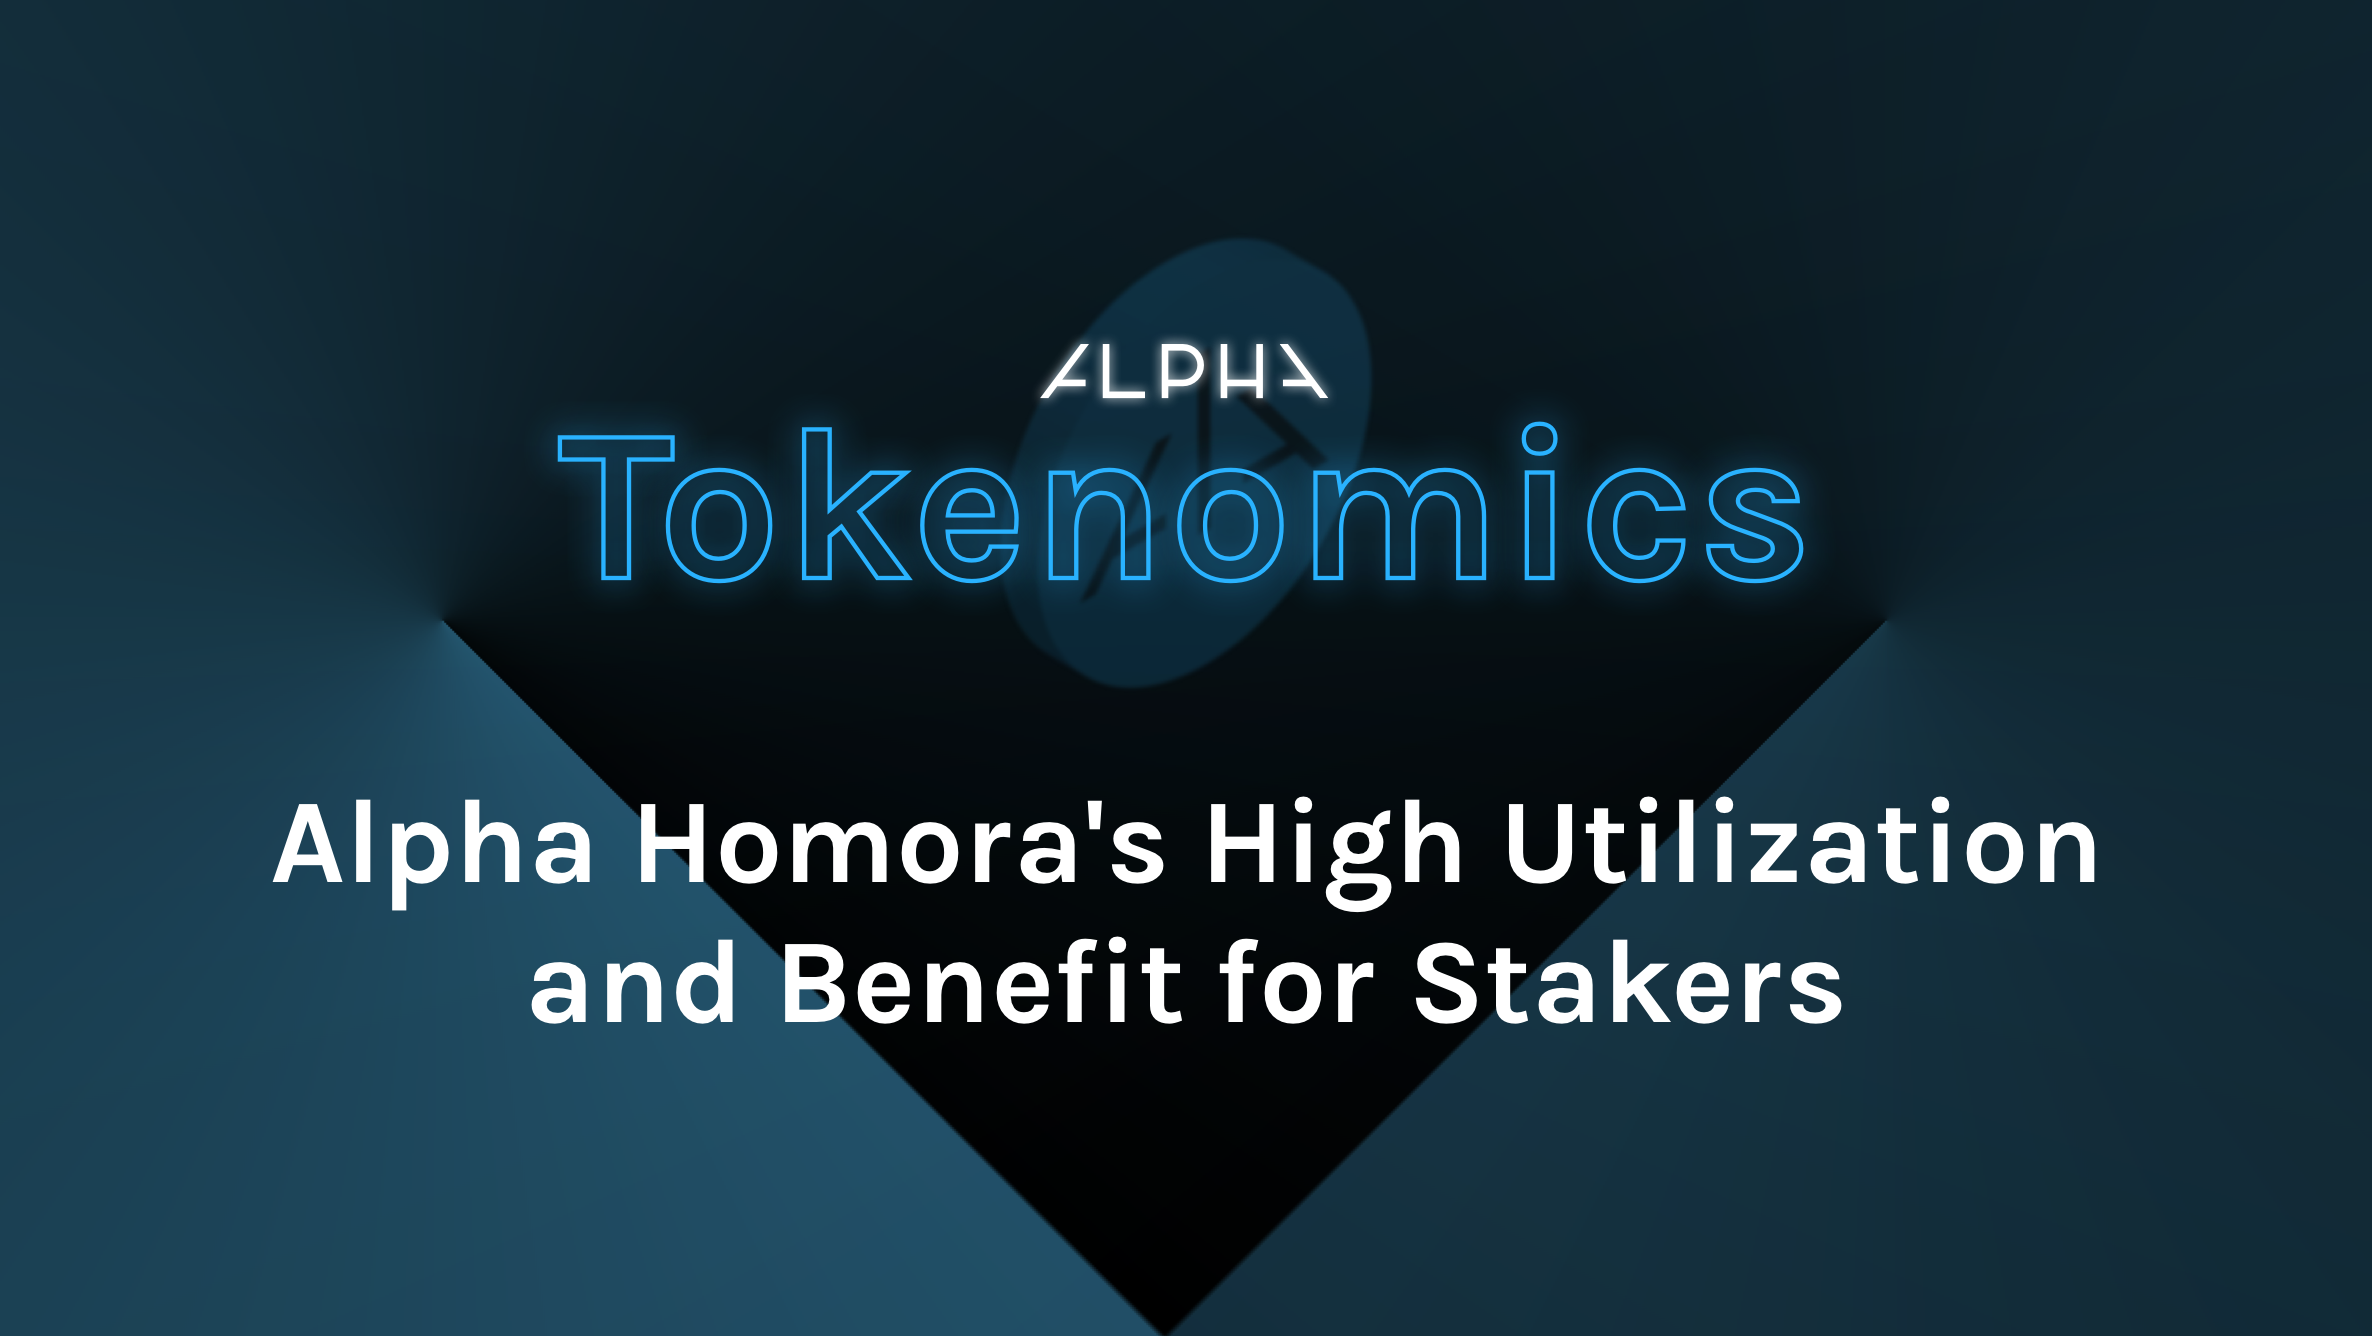 ALPHA tokenomics: Alpha Homora’s High Utilization and Benefit for Stakers